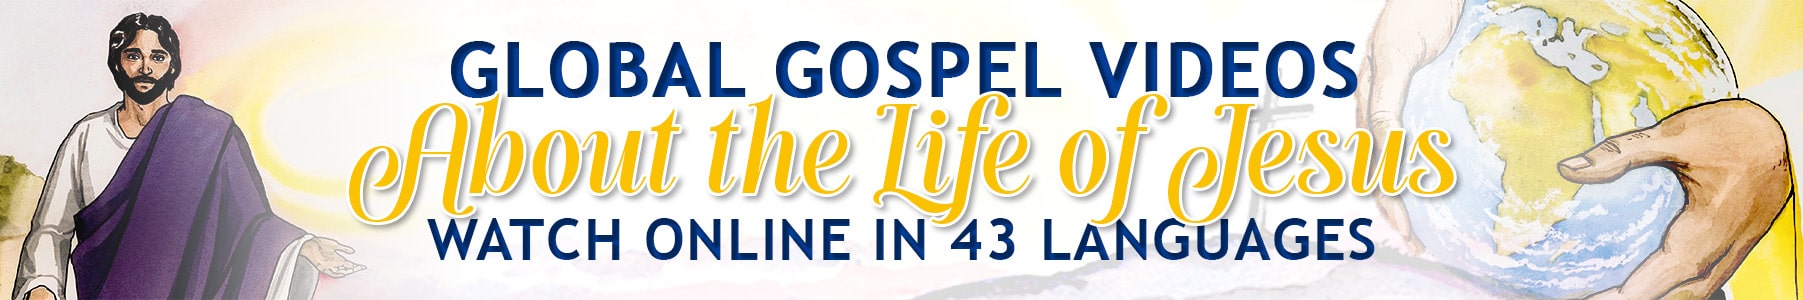 The Global Gospel in 43 languages